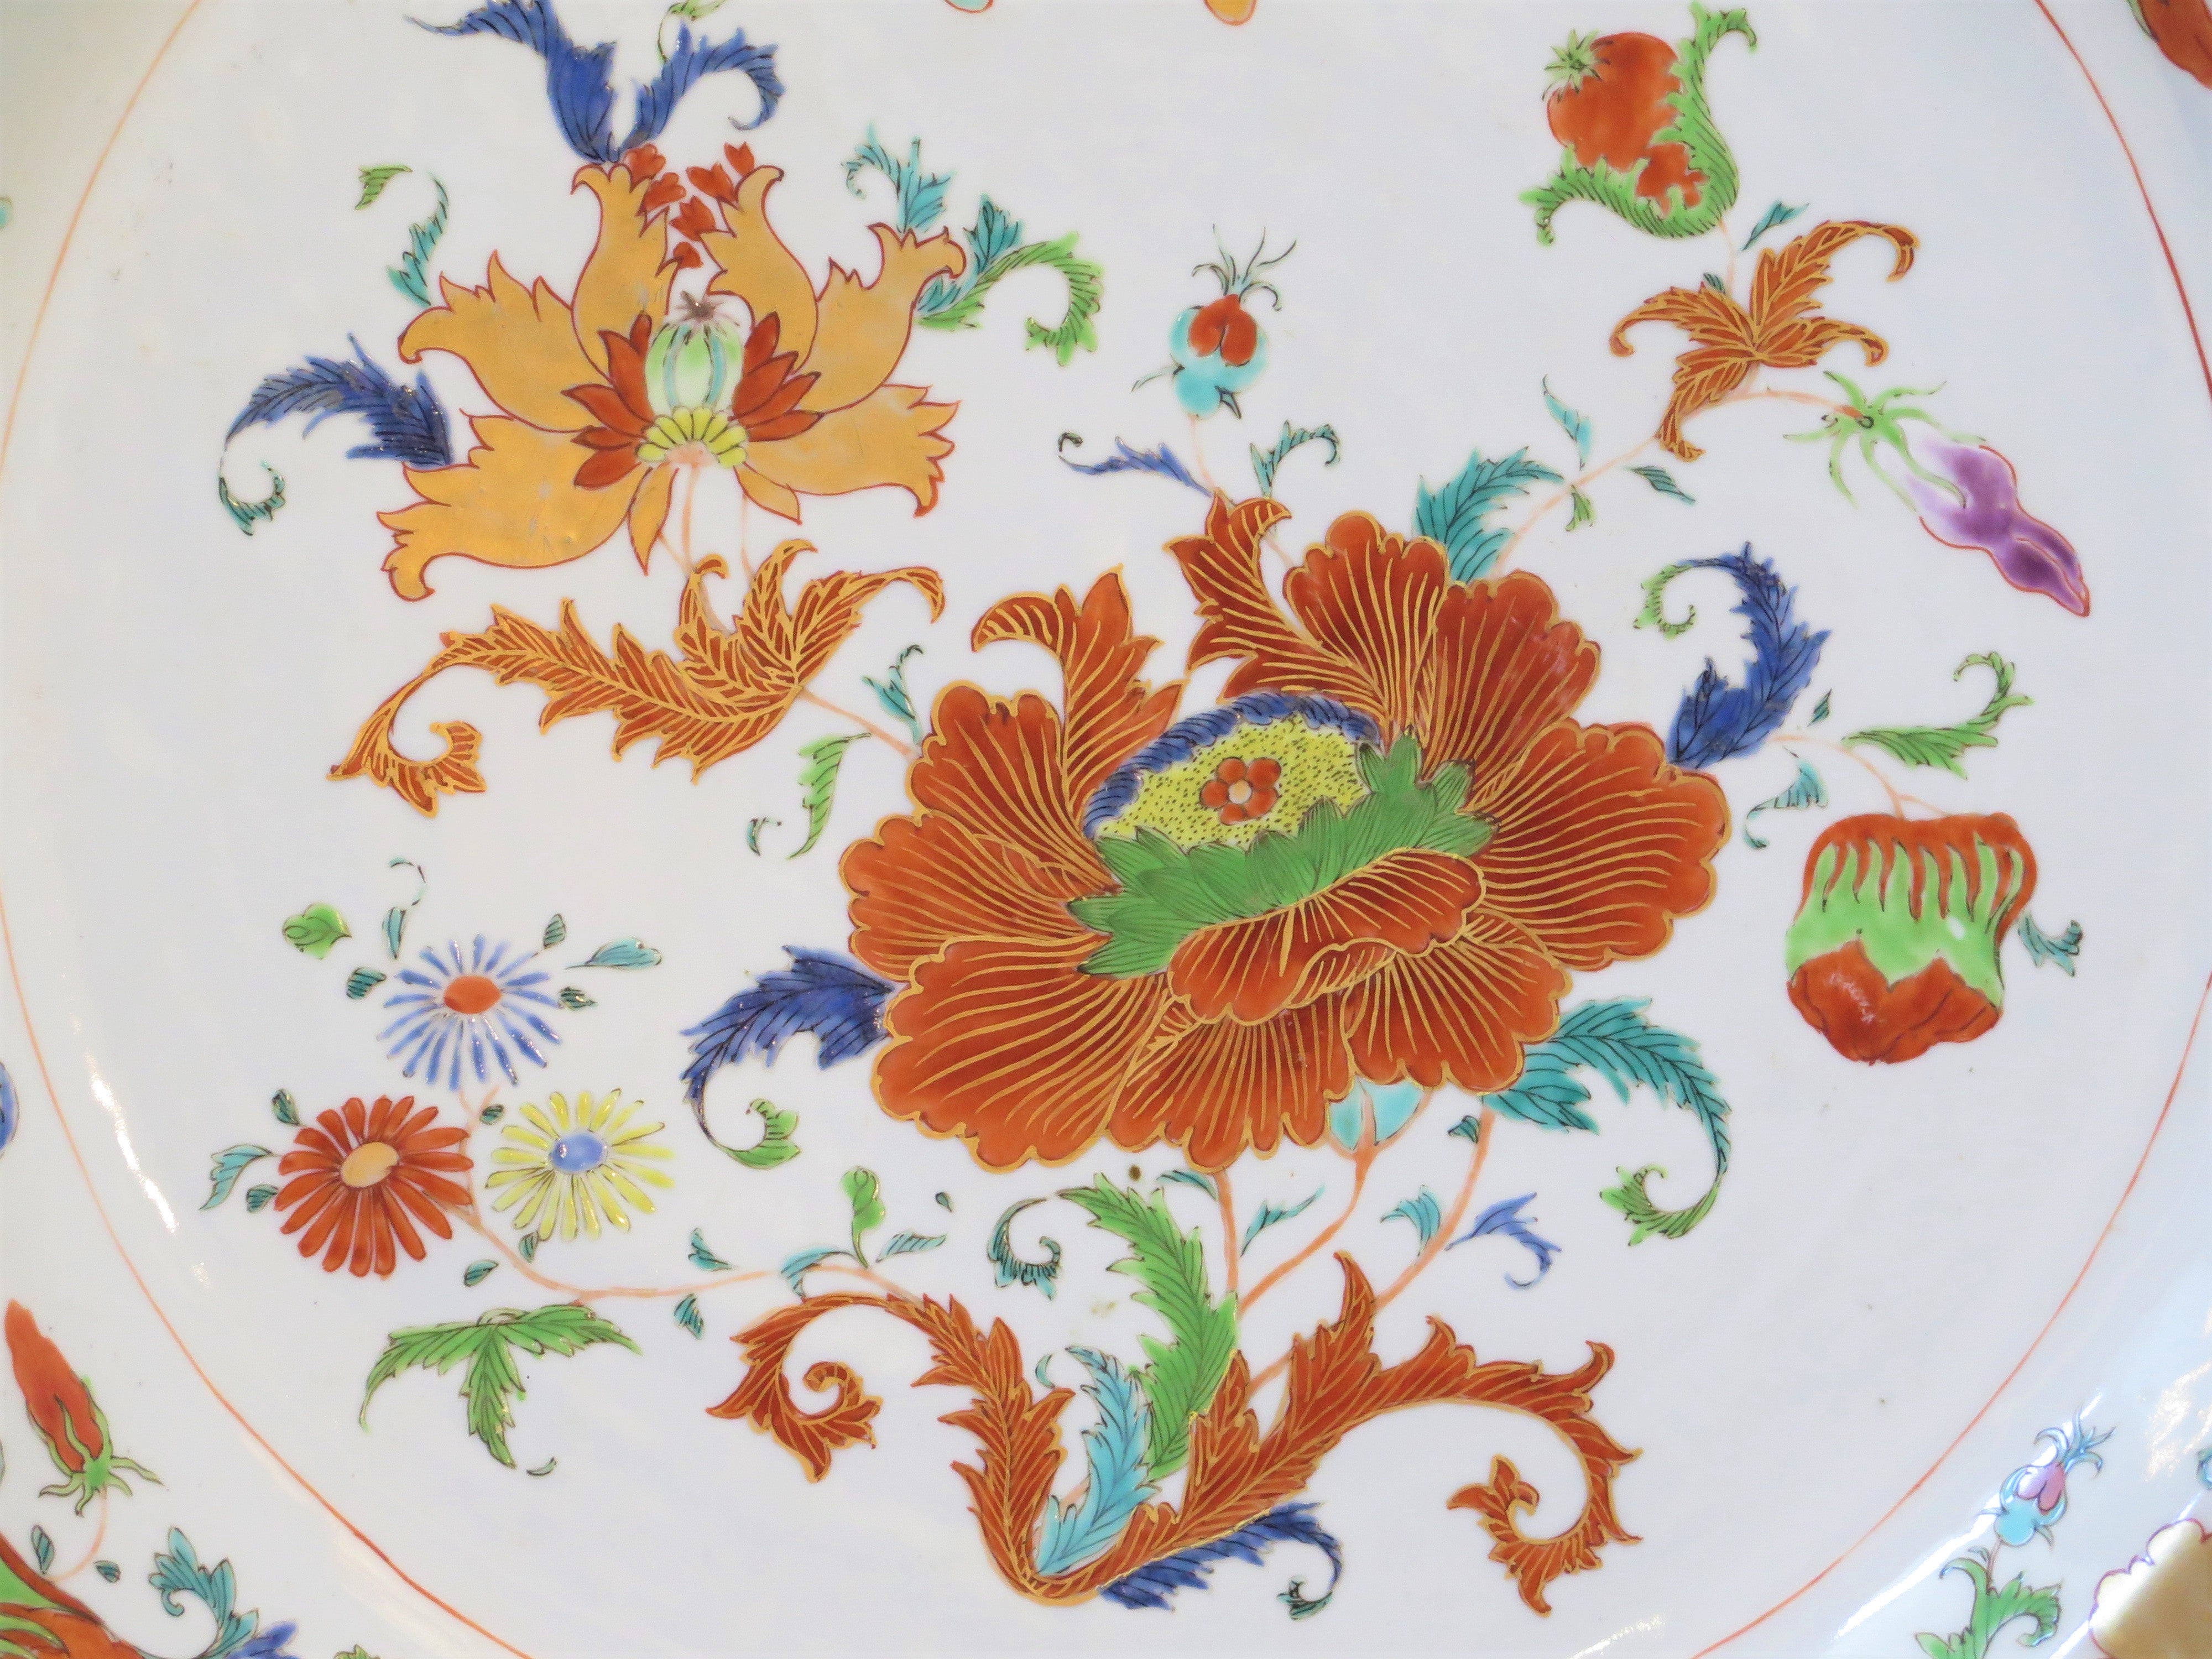 Pair of Chinese Famille Rose Madame de Pompadour Chargers